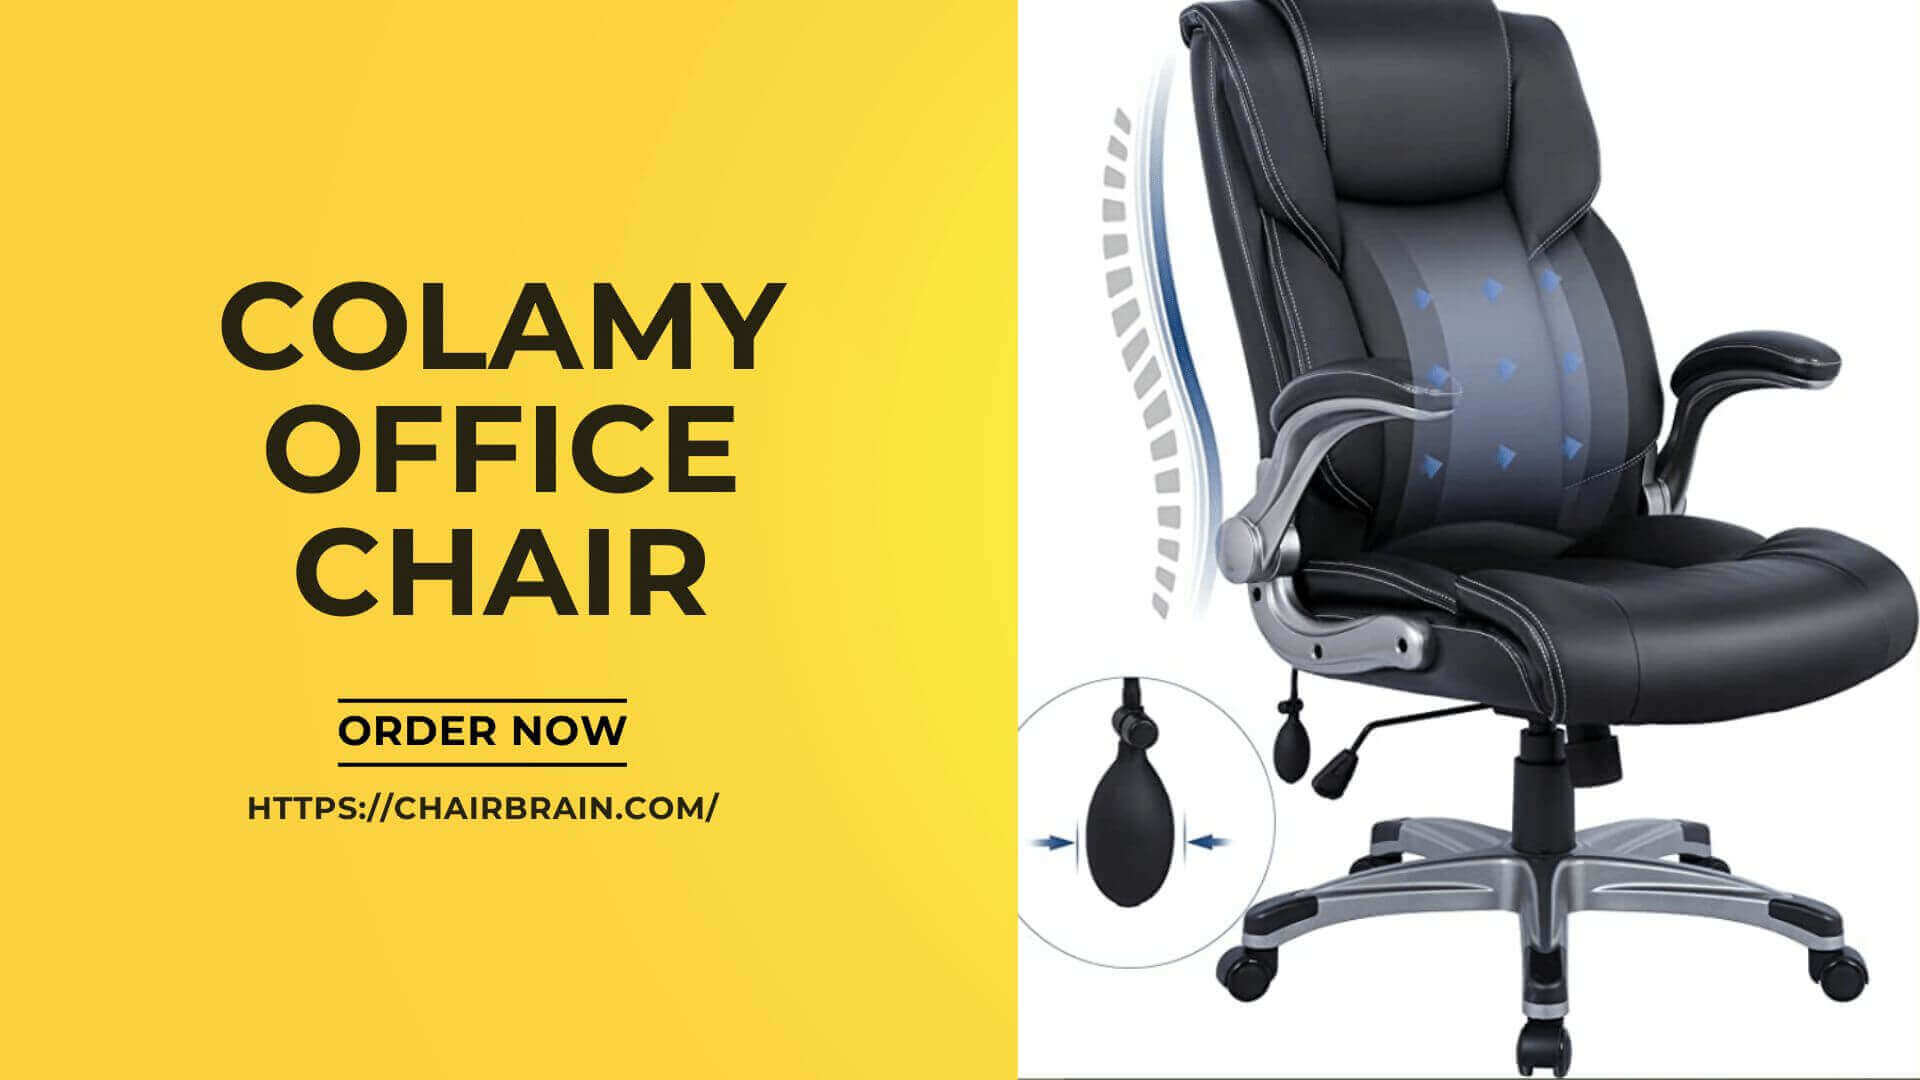 COLAMY Office Chair